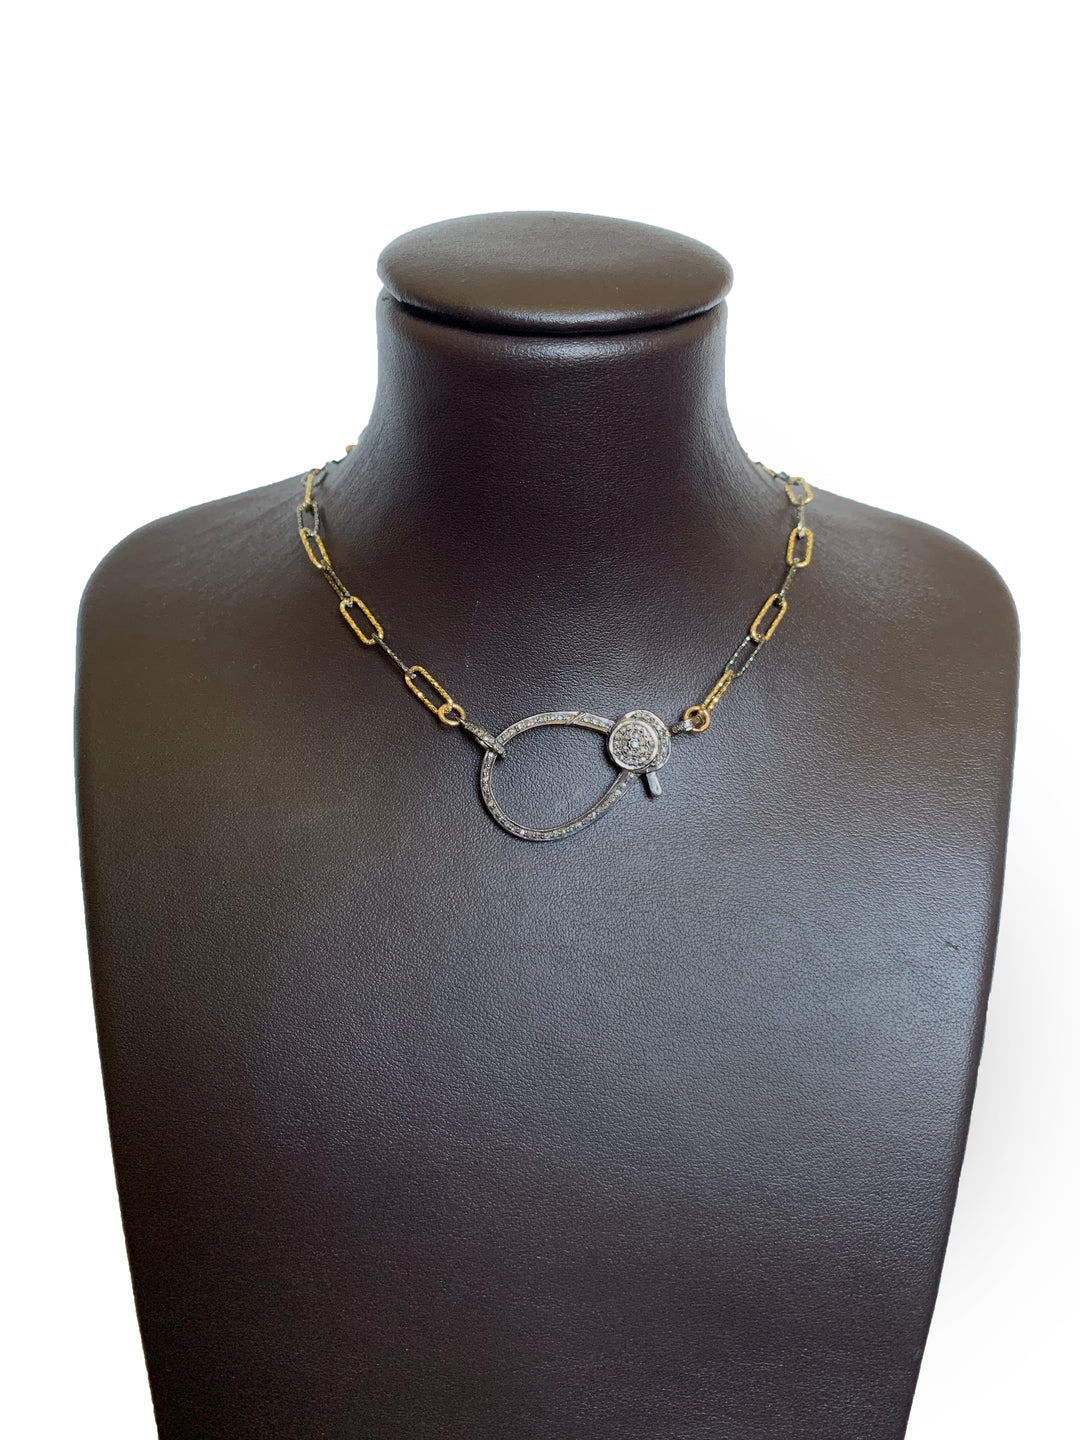 Oversize Gold & Silver Chain Necklace